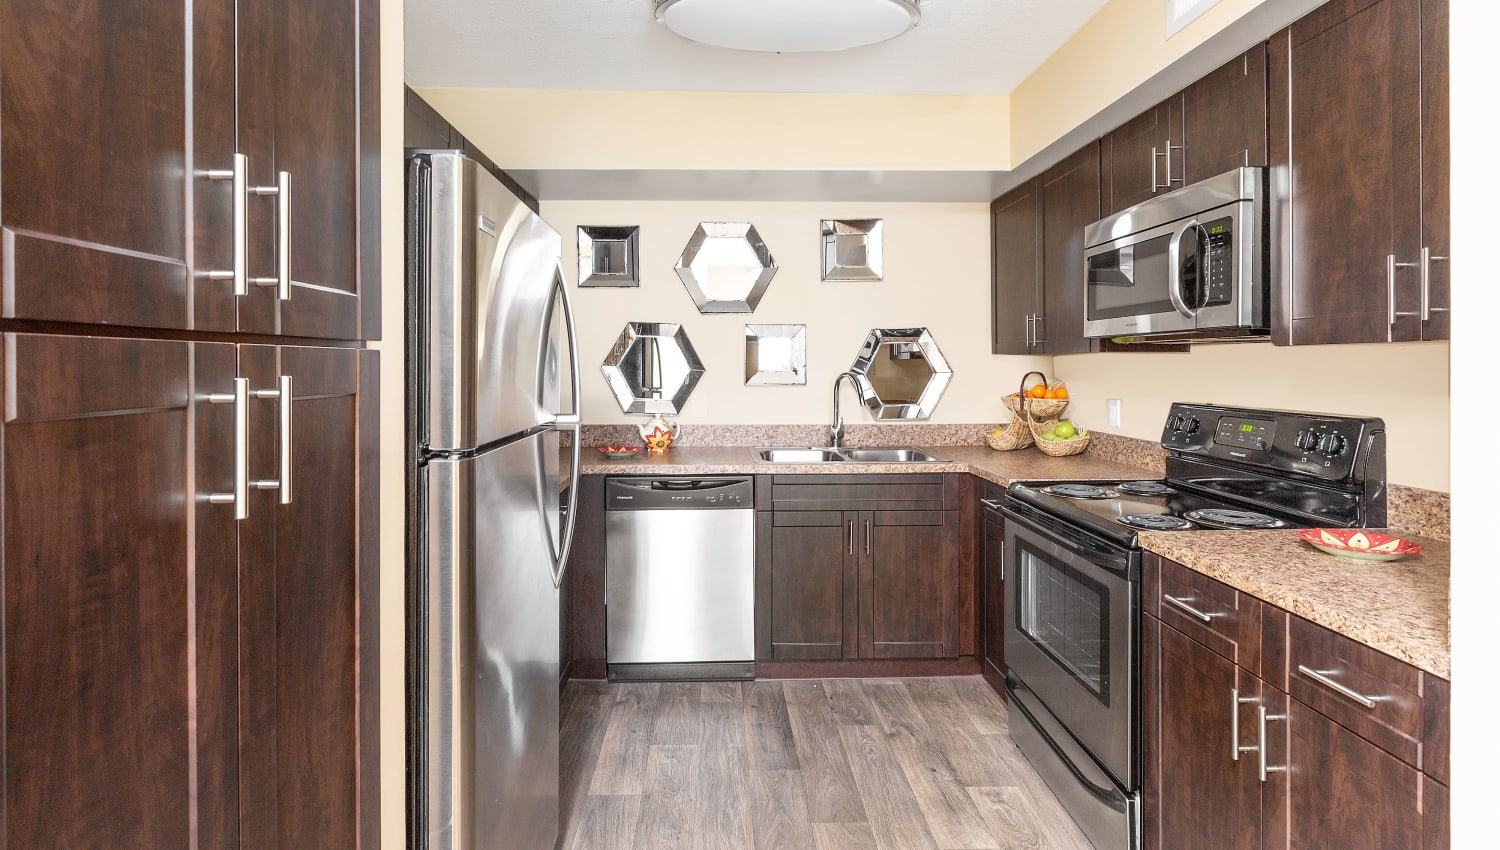 Model kitchen at Club Mira Lago Apartments in Coral Springs, Florida